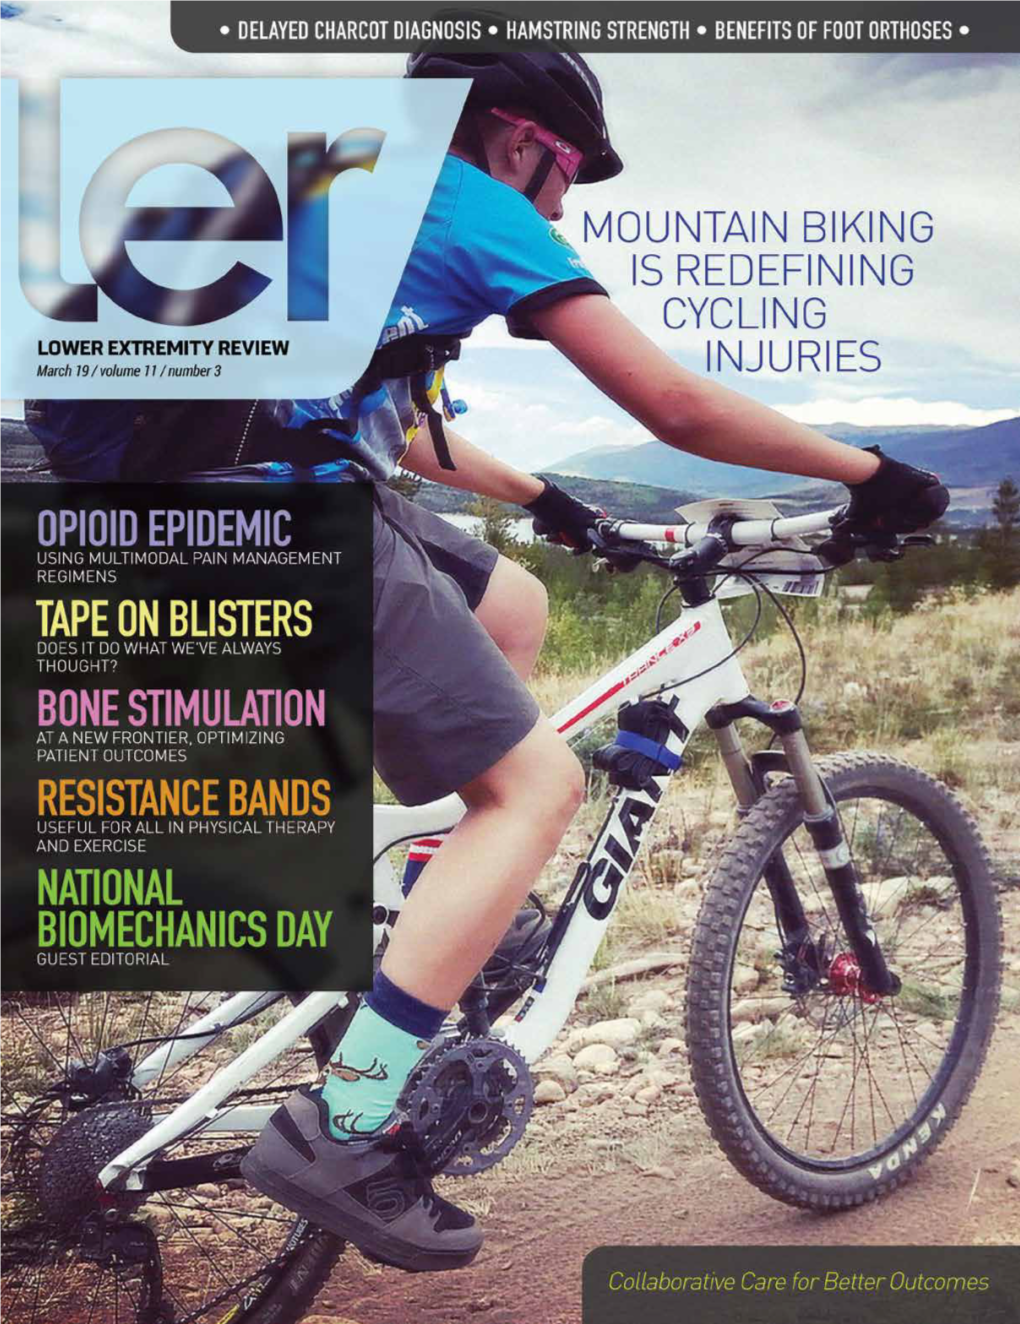 Why So Much Interest in Mountain Biking?,” Page 40)